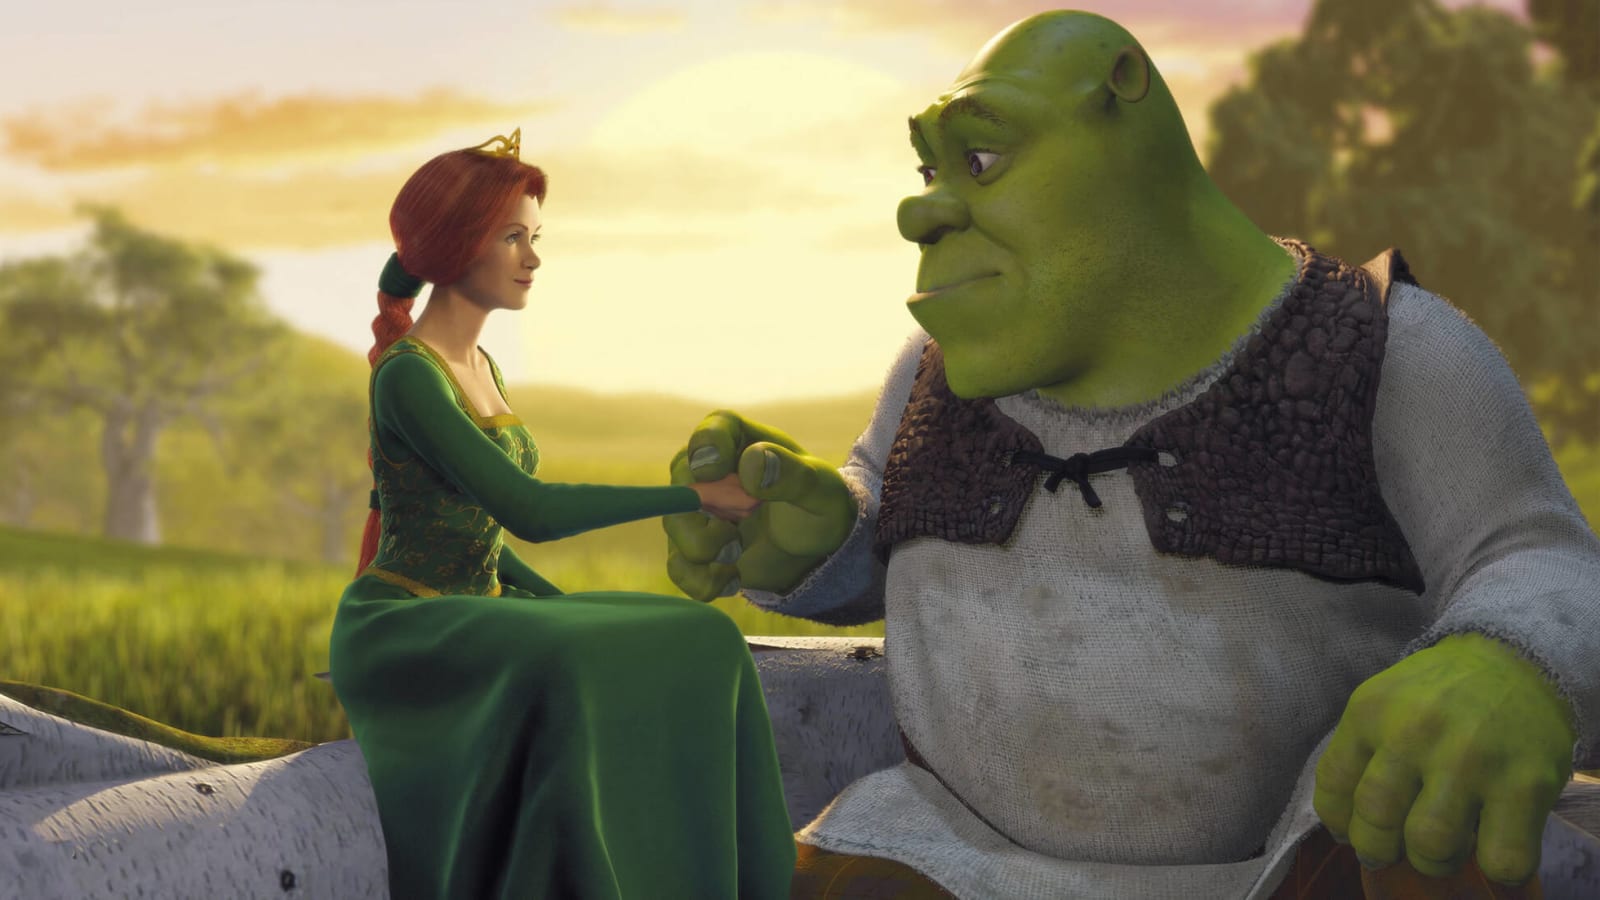 20 facts you might not know about 'Shrek'